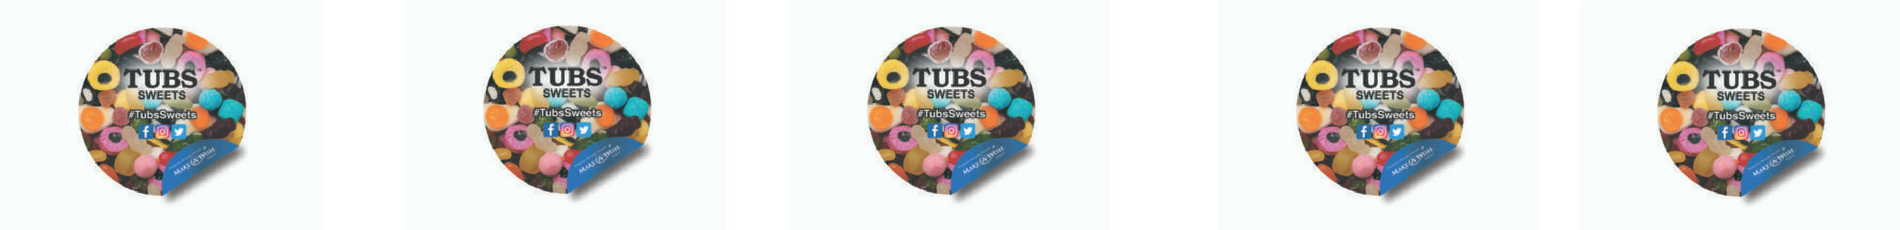 Tubs Sweets